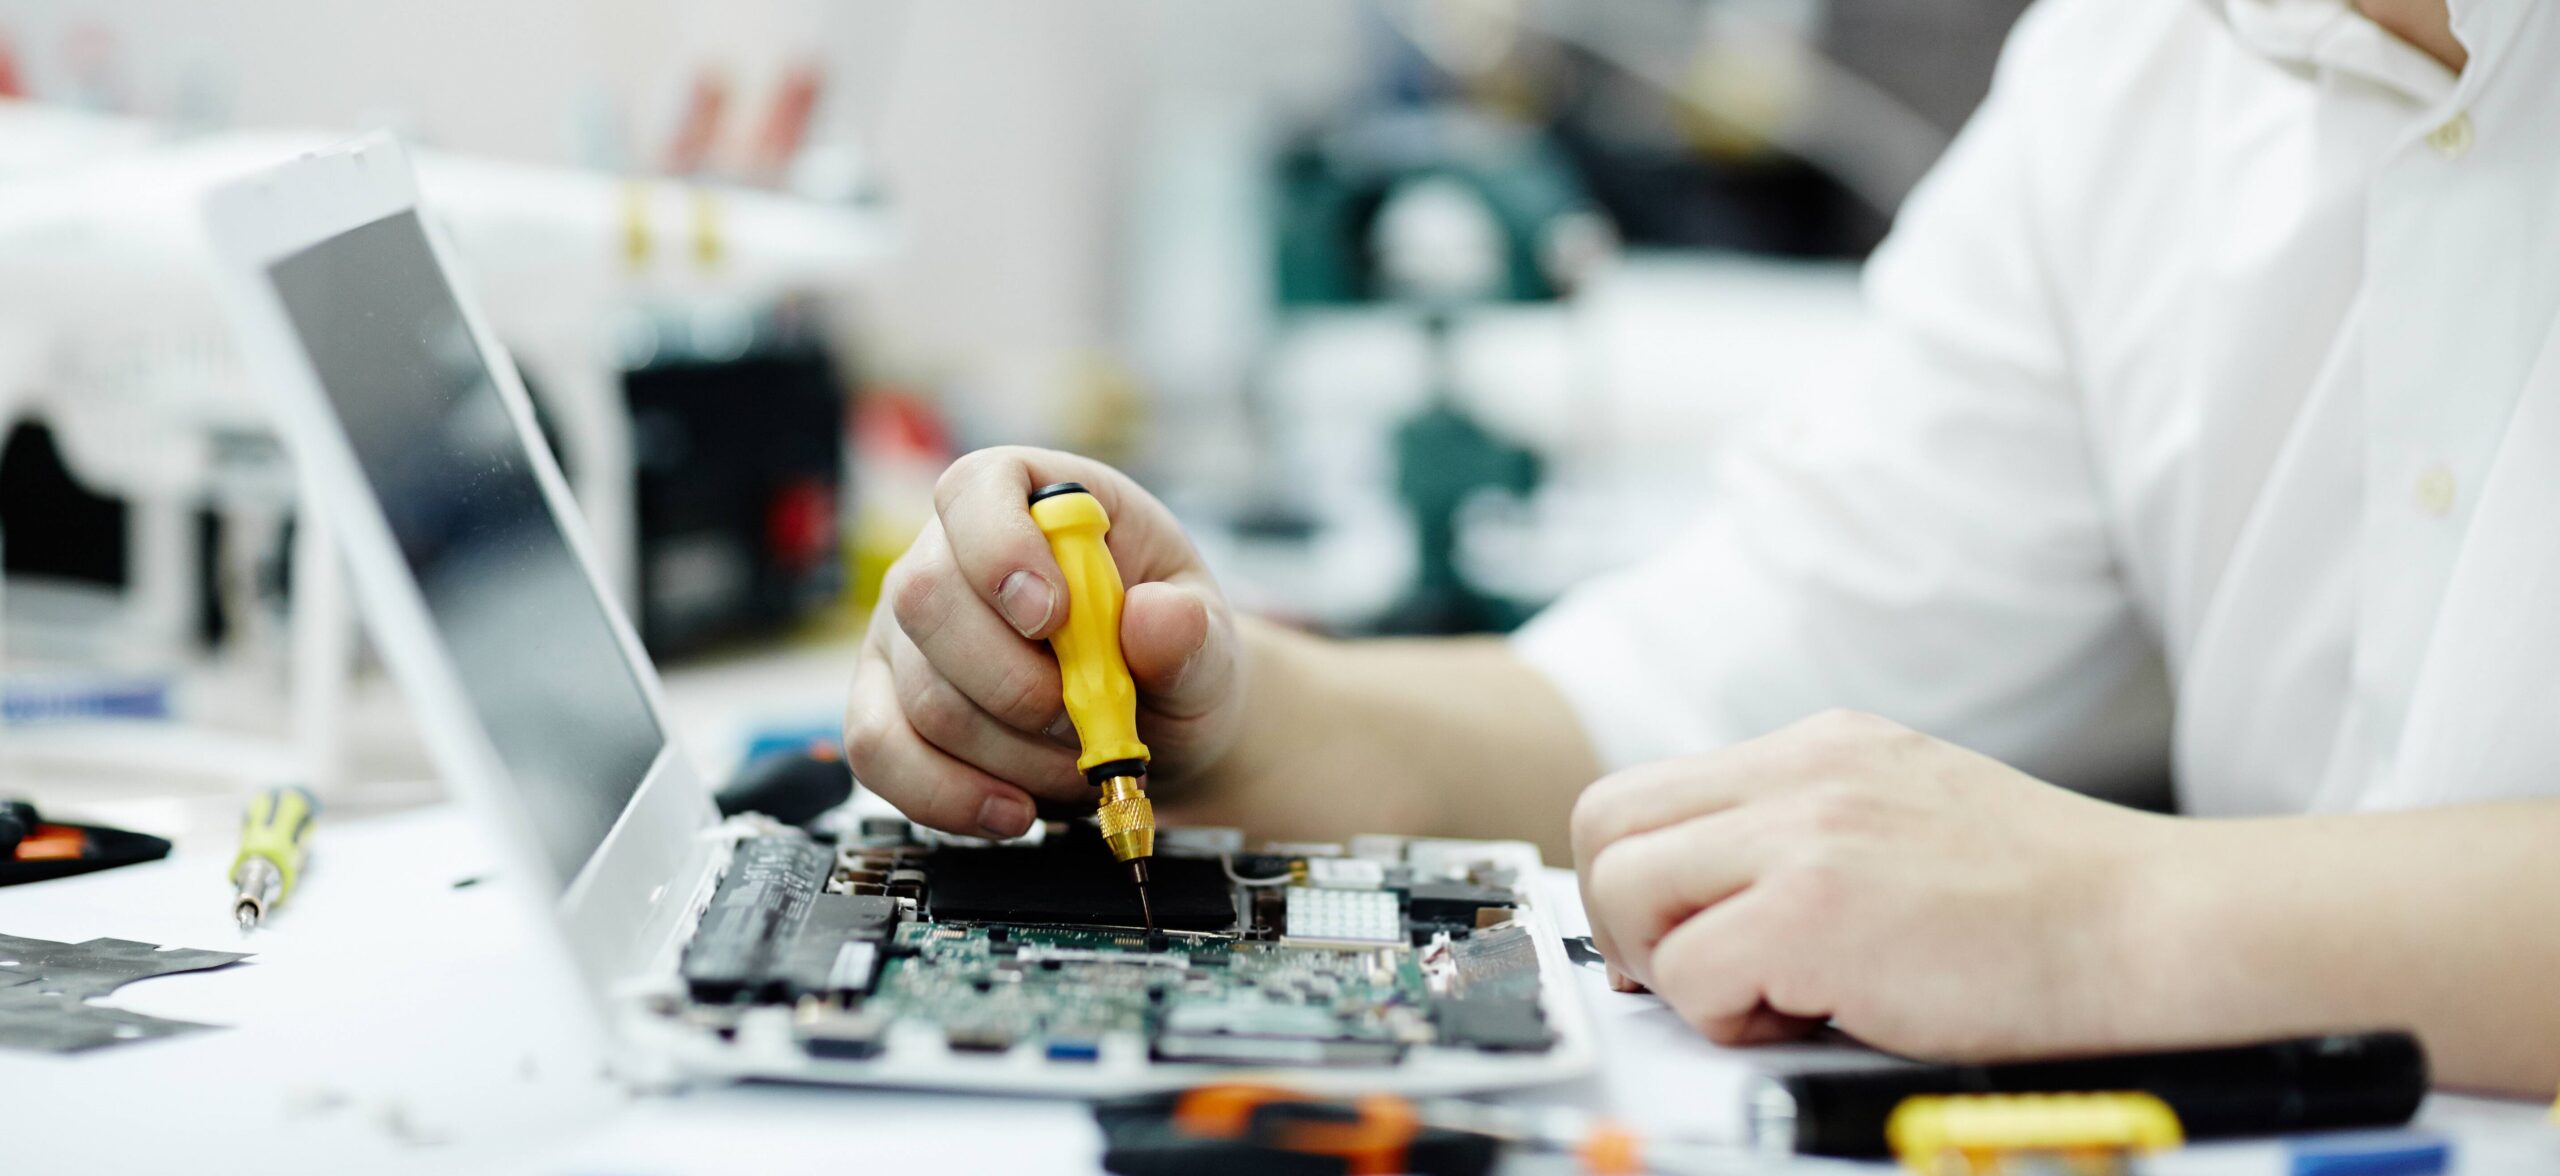 Tuzla Computer Repair and Technical Service